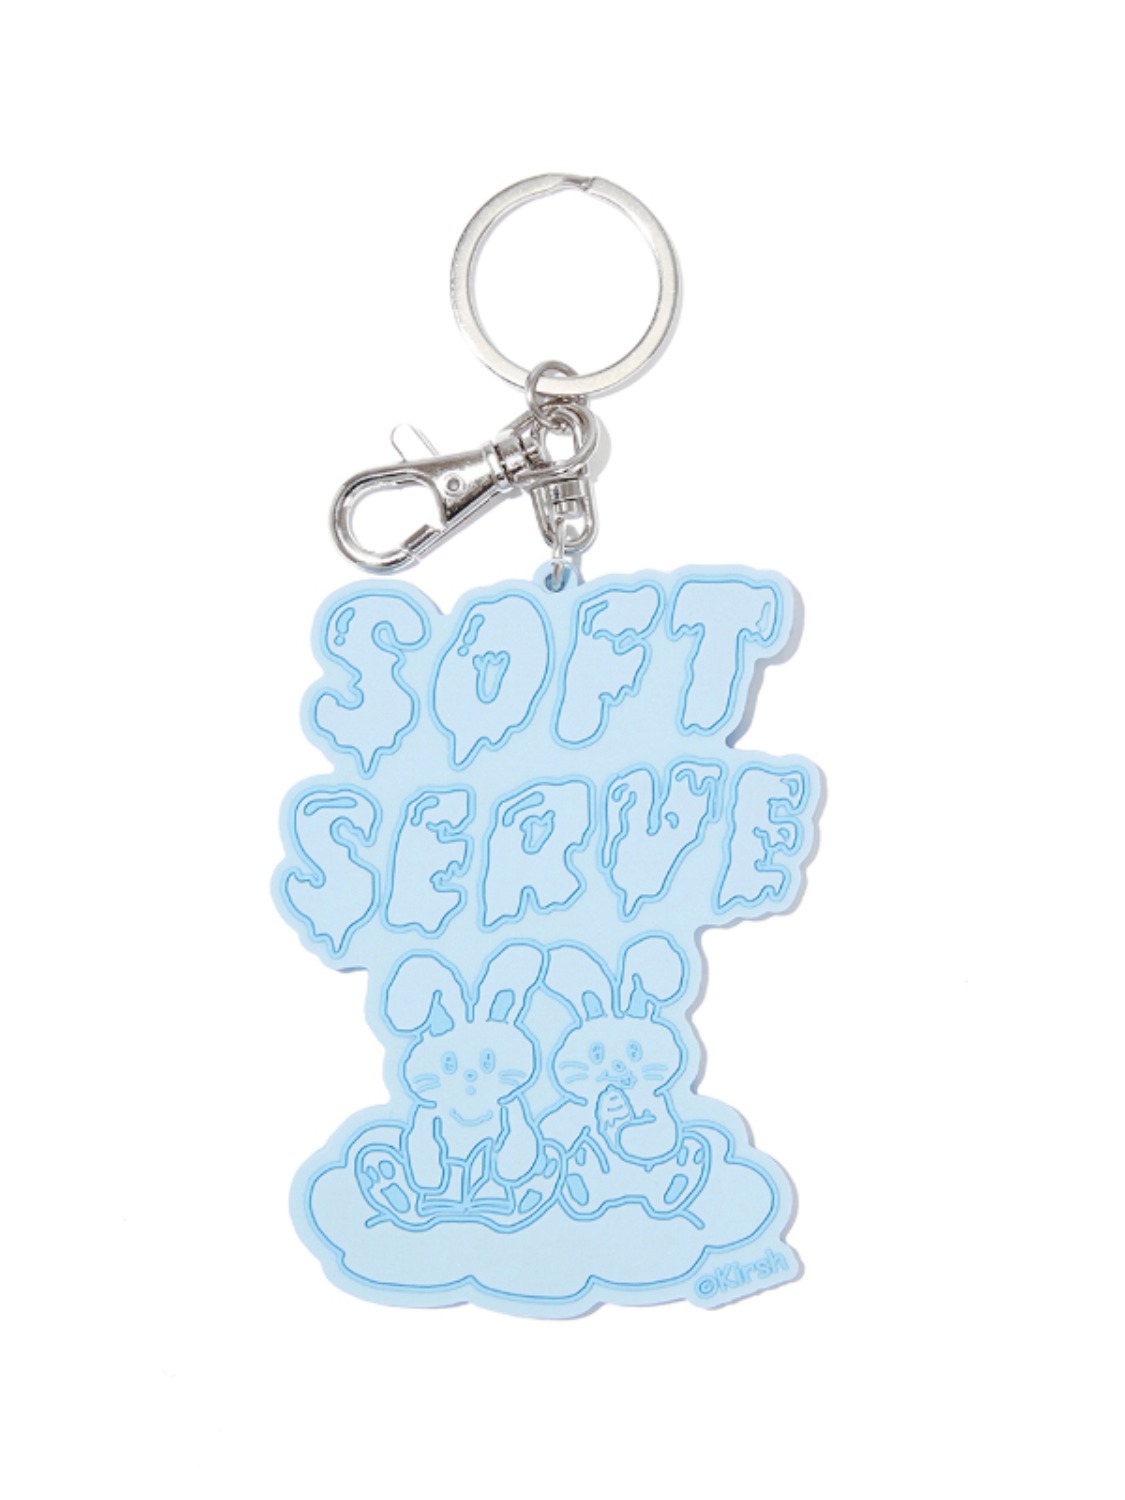 TWIN BUNNY RUBBER KEYRING KH [SKY]S